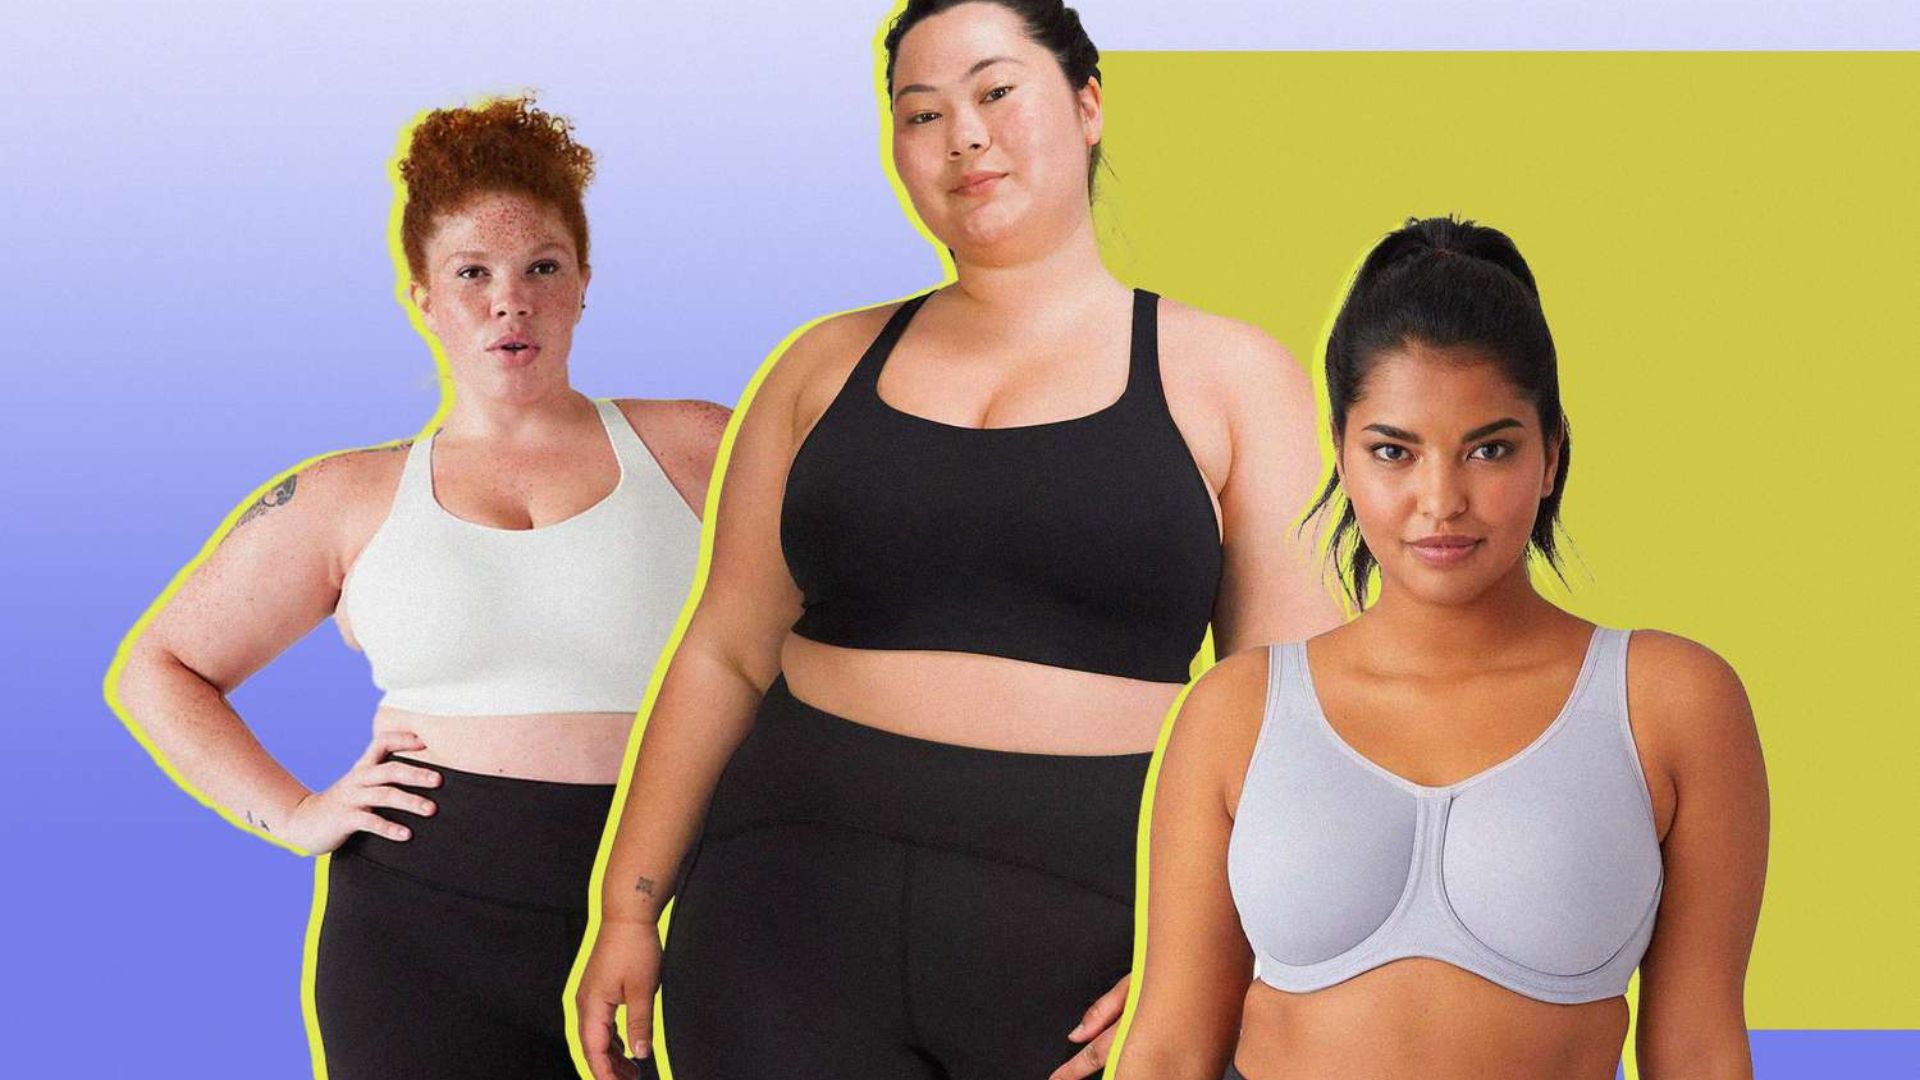 Finding the Best Sports Bras for Bigger Busts